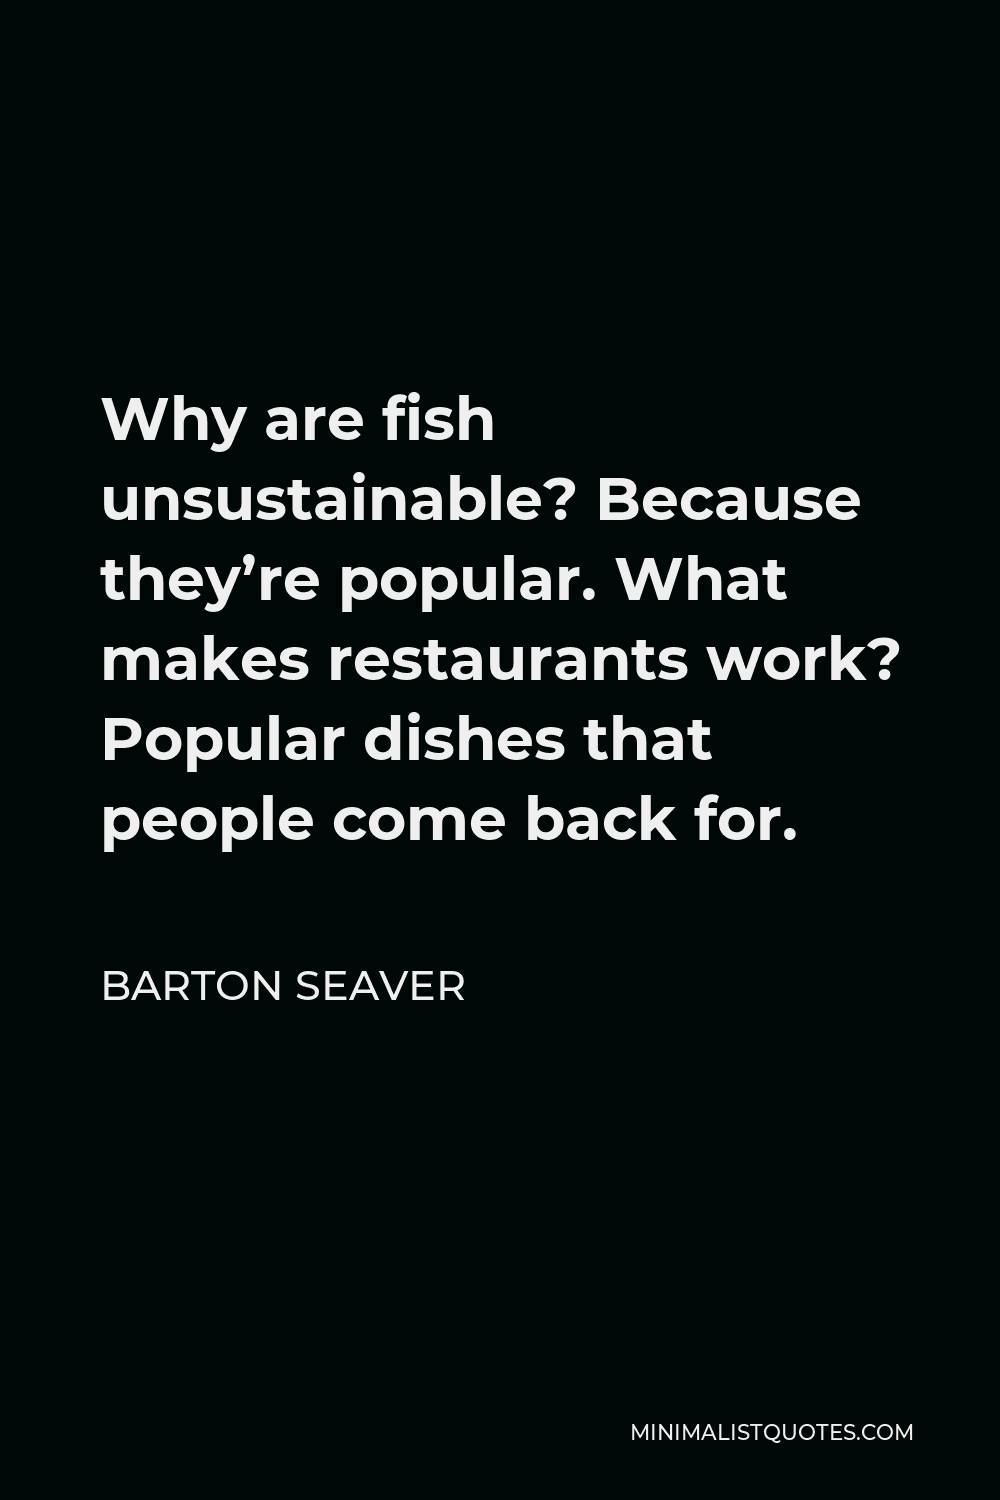 Barton Seaver Quote - Why are fish unsustainable? Because they’re popular. What makes restaurants work? Popular dishes that people come back for.